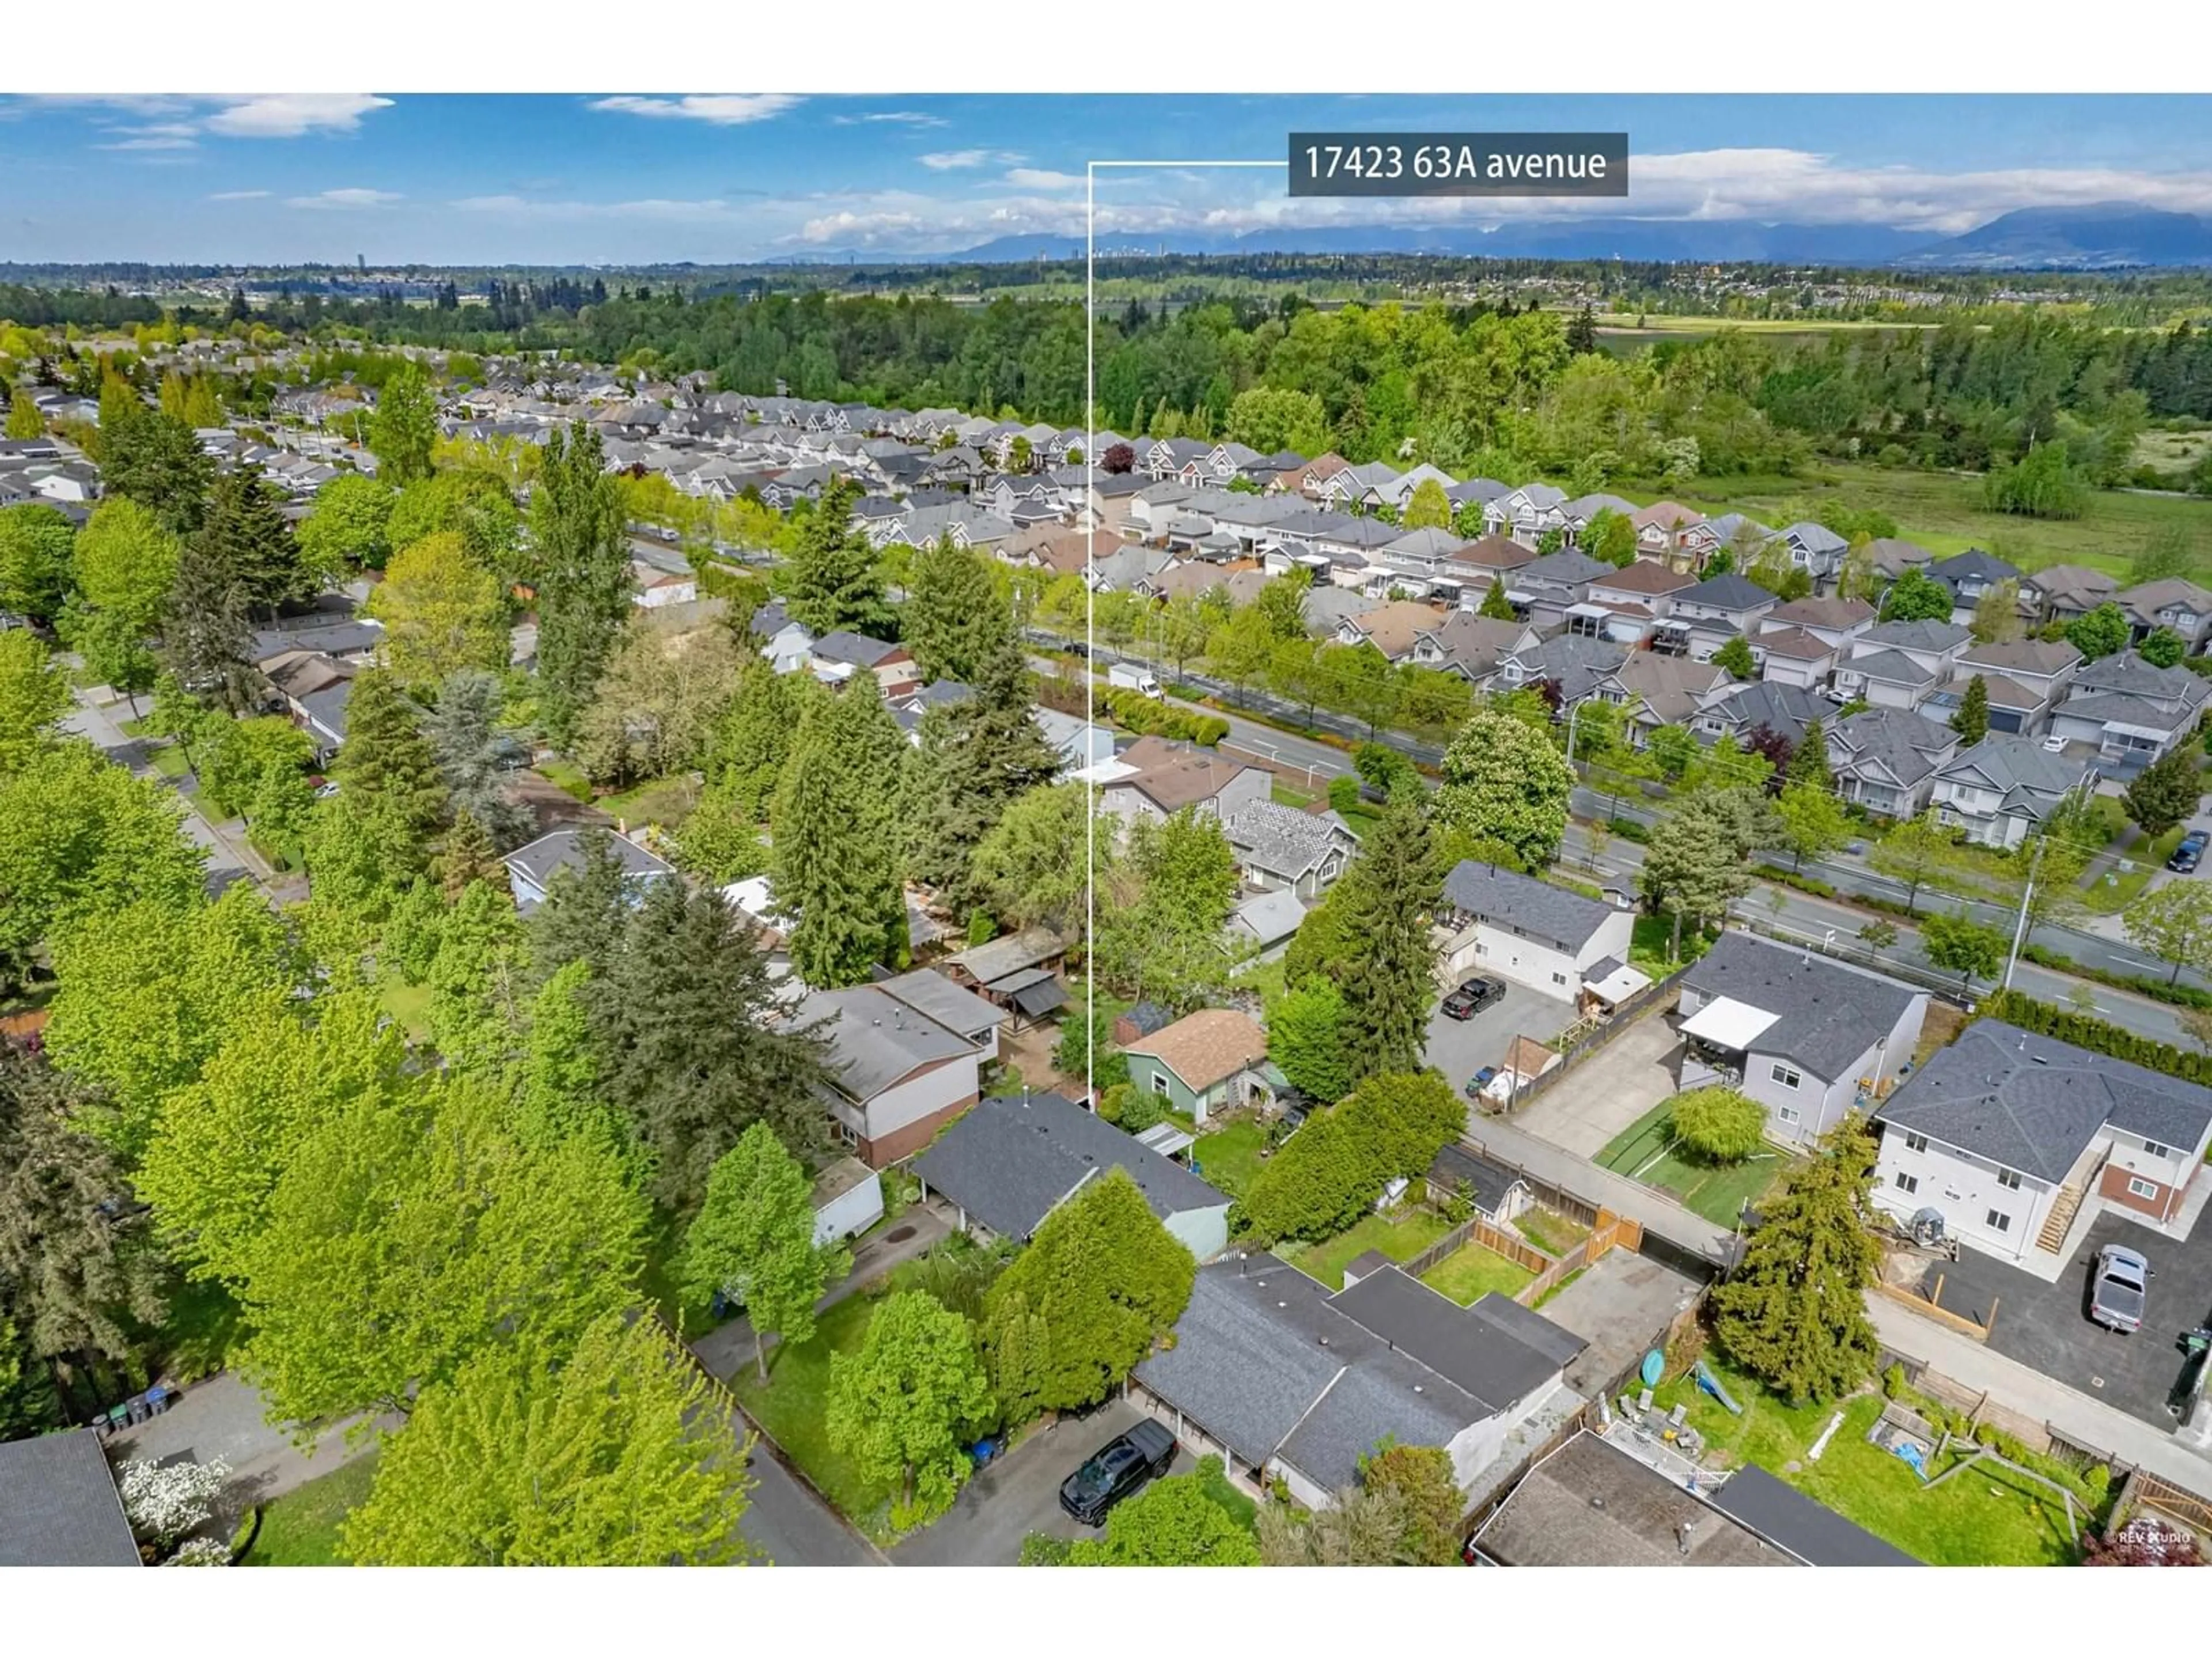 Street view for 17423 63A AVENUE, Surrey British Columbia V3S5J2